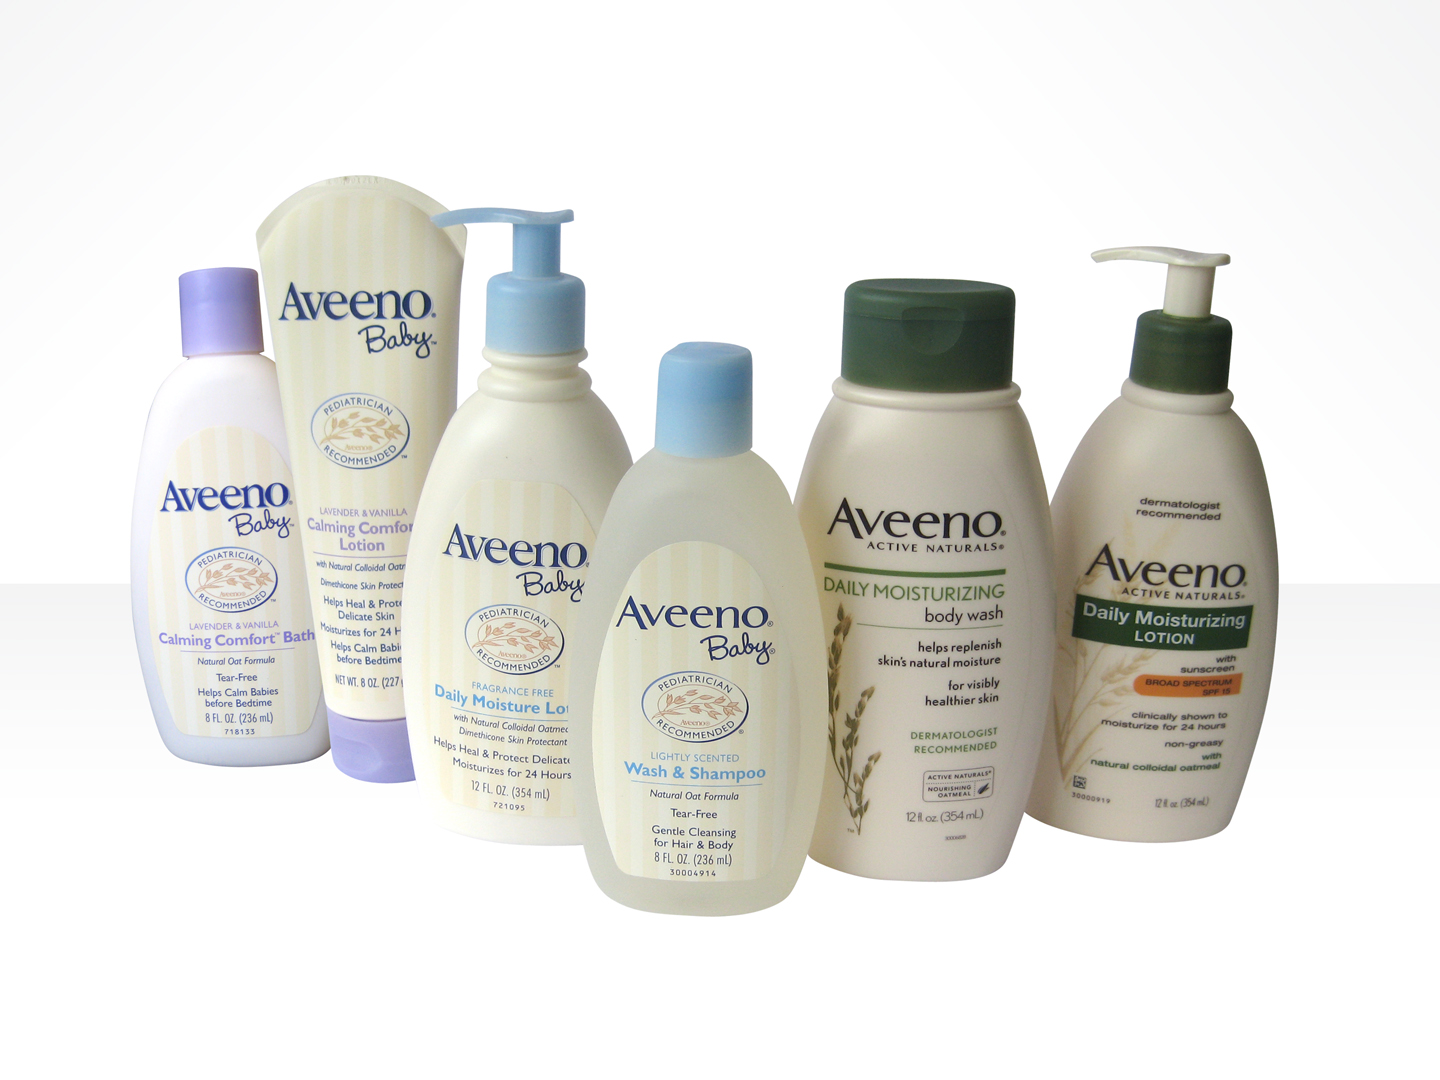  6 Aveeno Products Giveaway